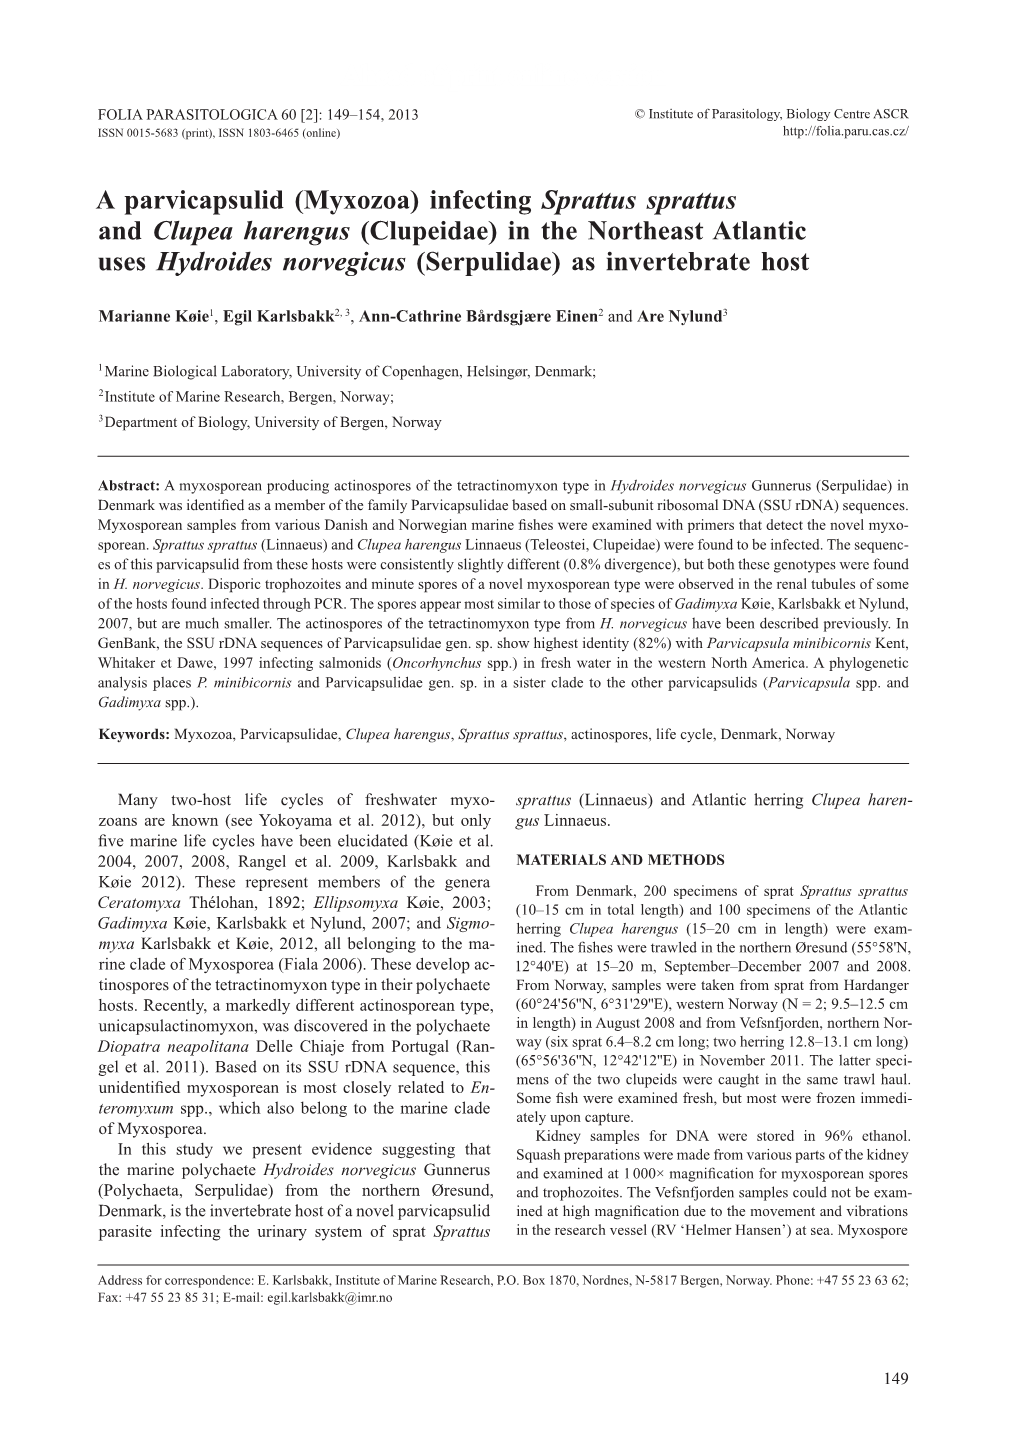 Ahead of Print Online Version a Parvicapsulid (Myxozoa) Infecting Sprattus Sprattus and Clupea Harengus (Clupeidae) in the North